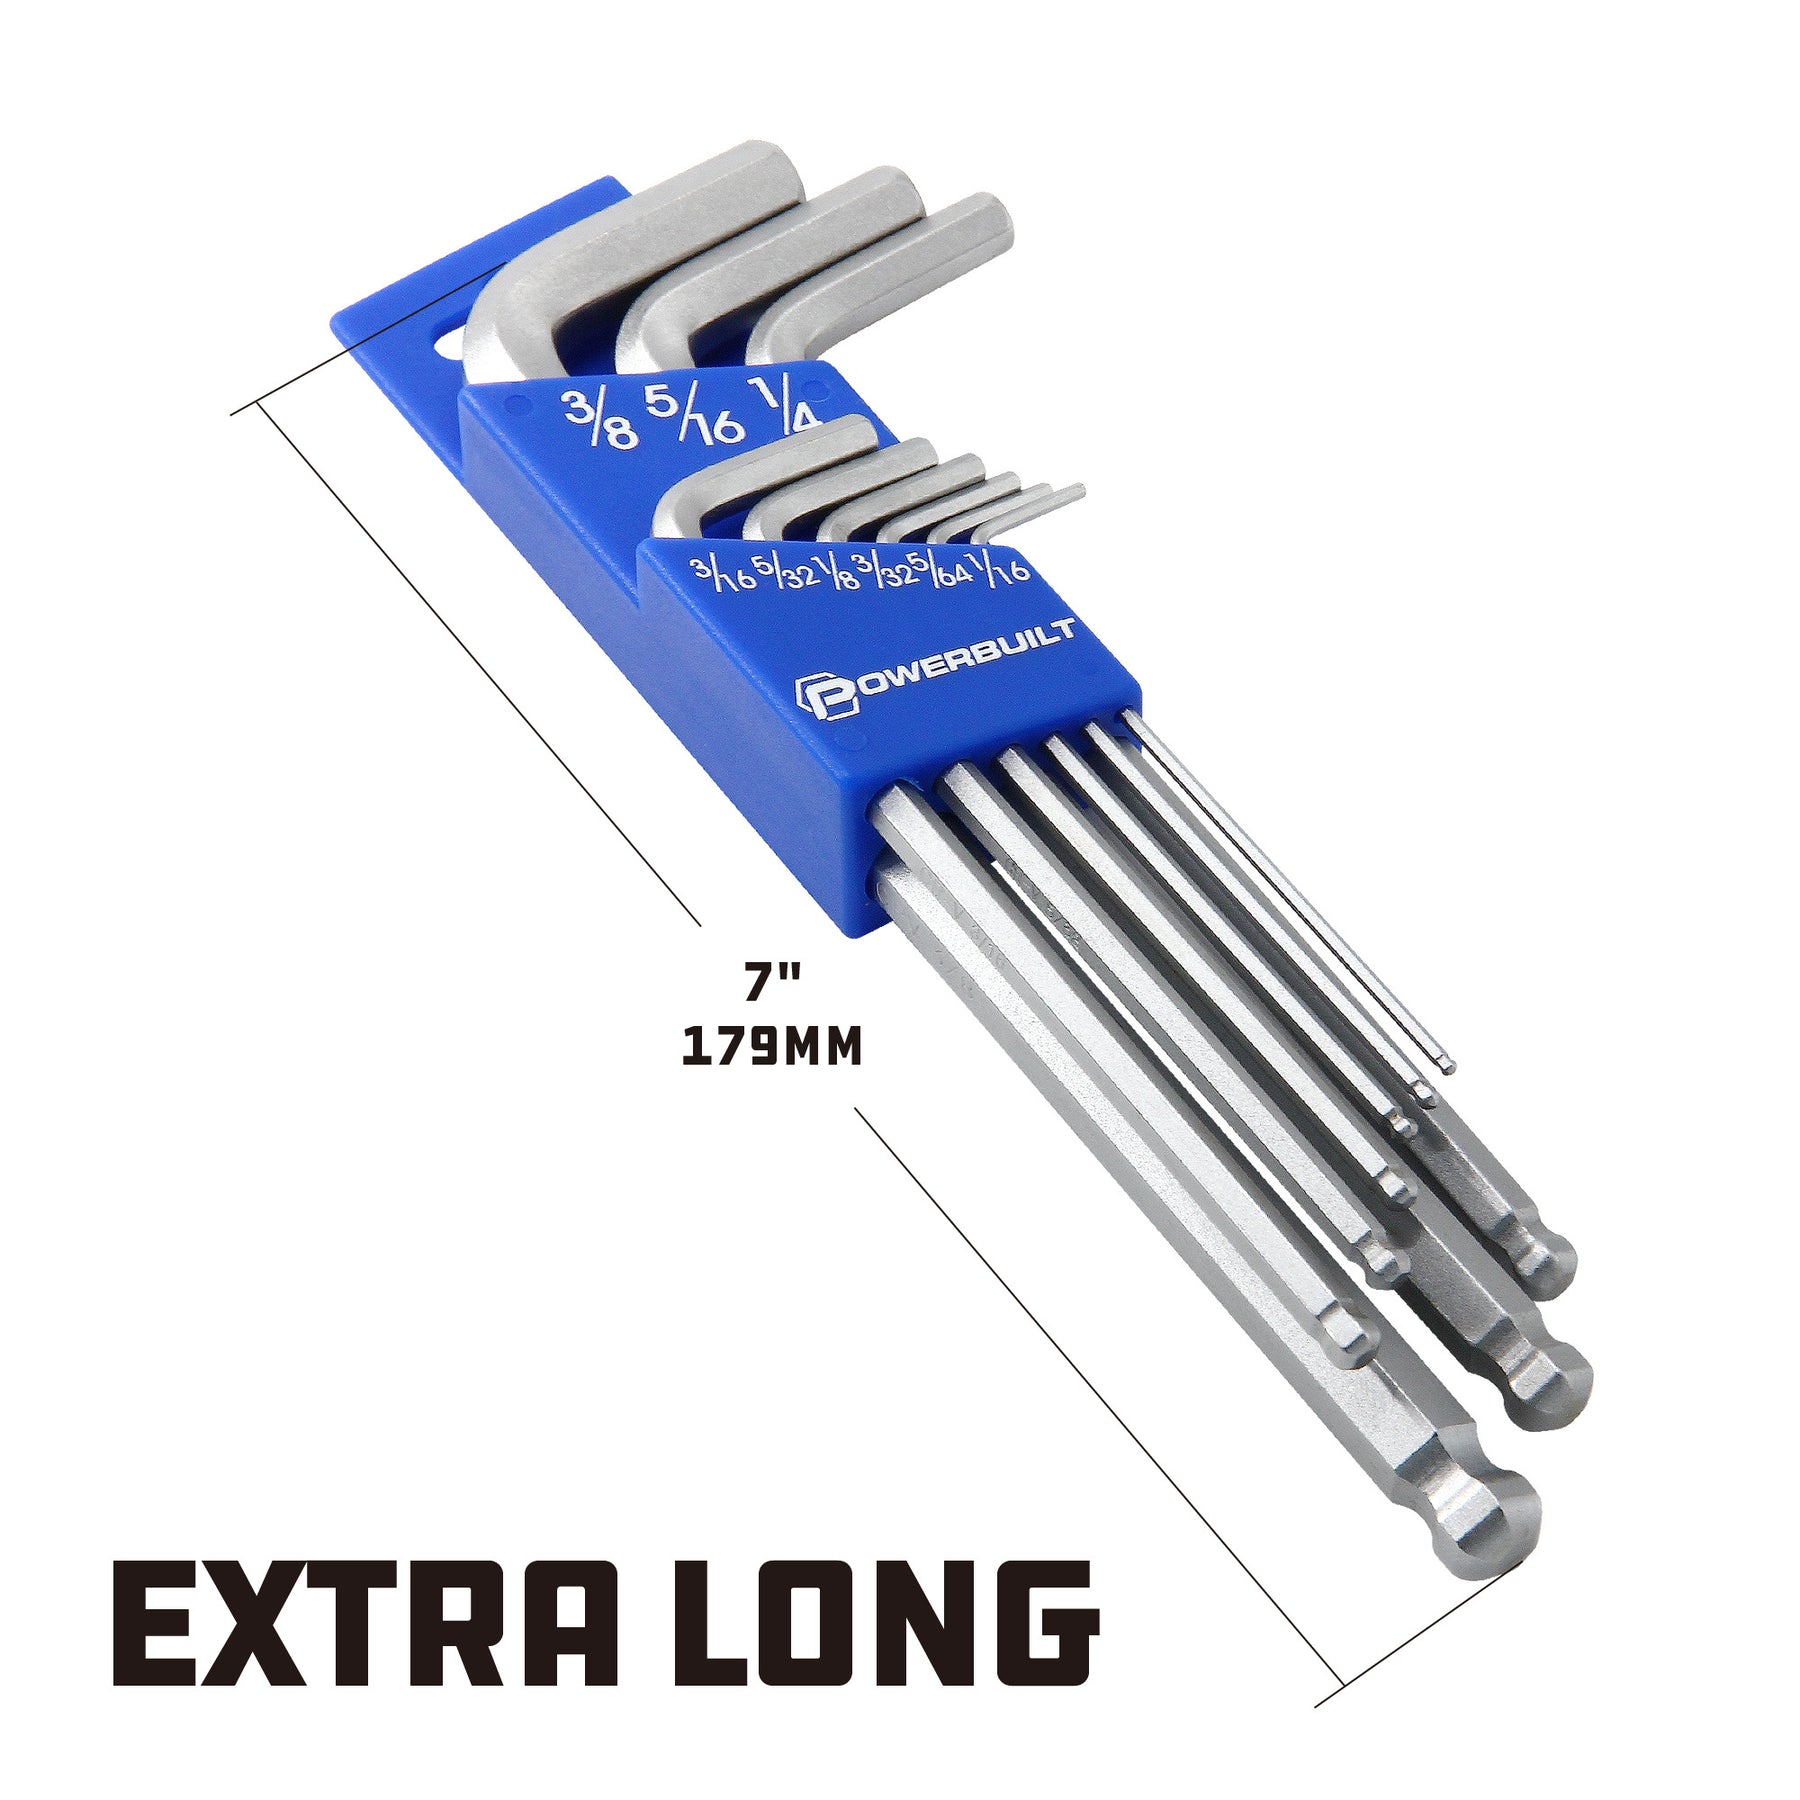 9 Piece SAE Long Arm Hex Key Wrench Set